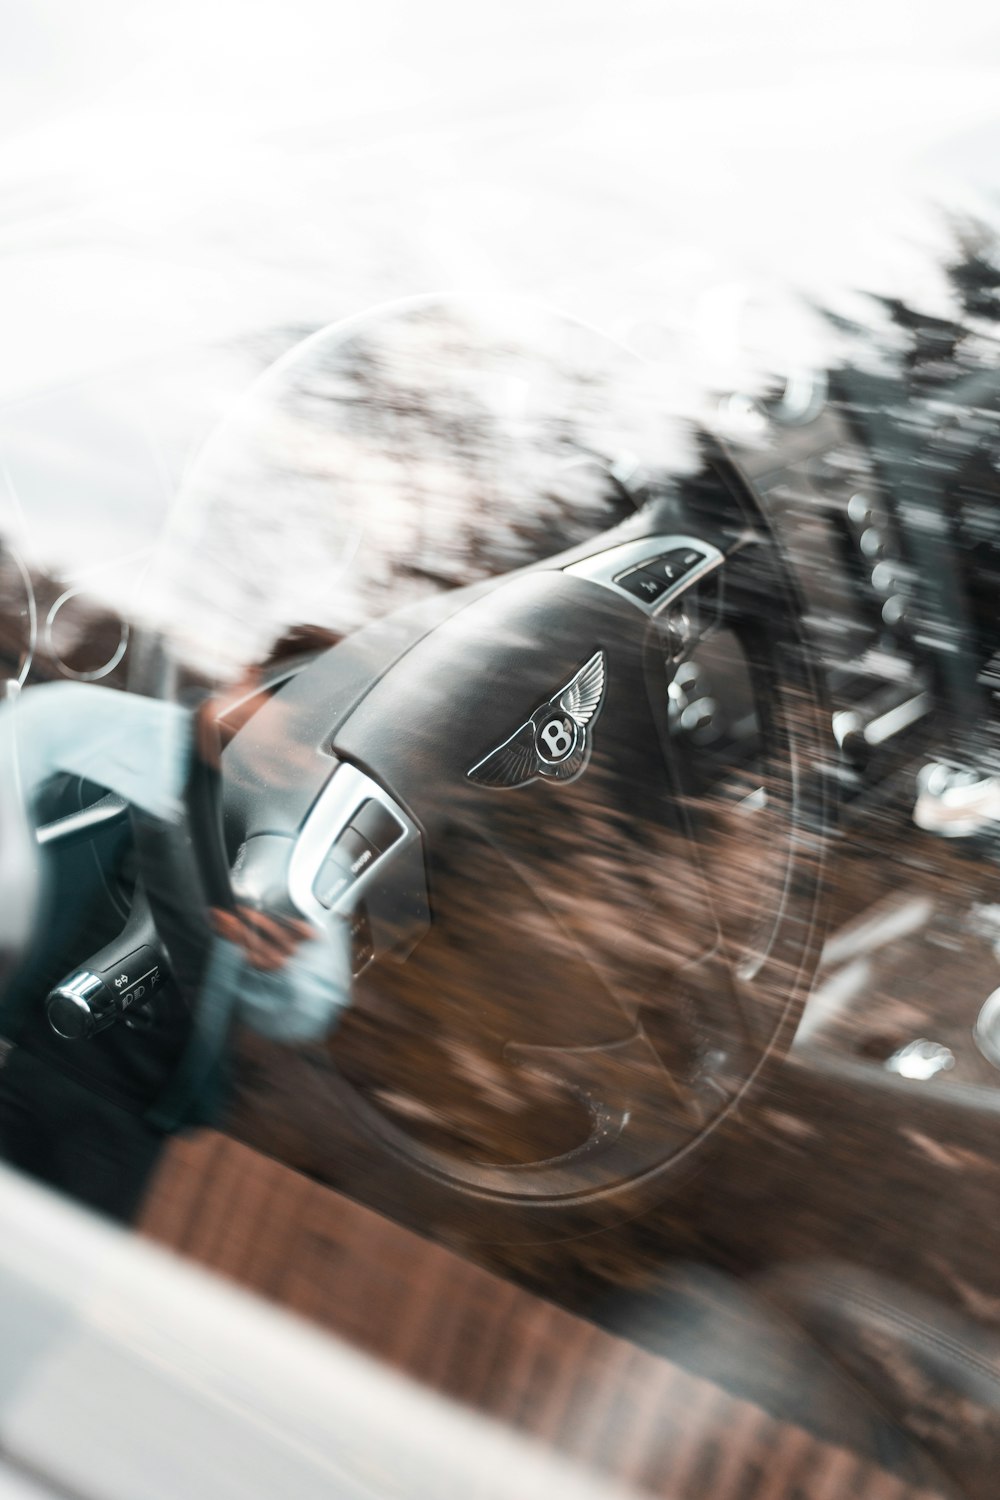 a blurry photo of a motorcycle in a car